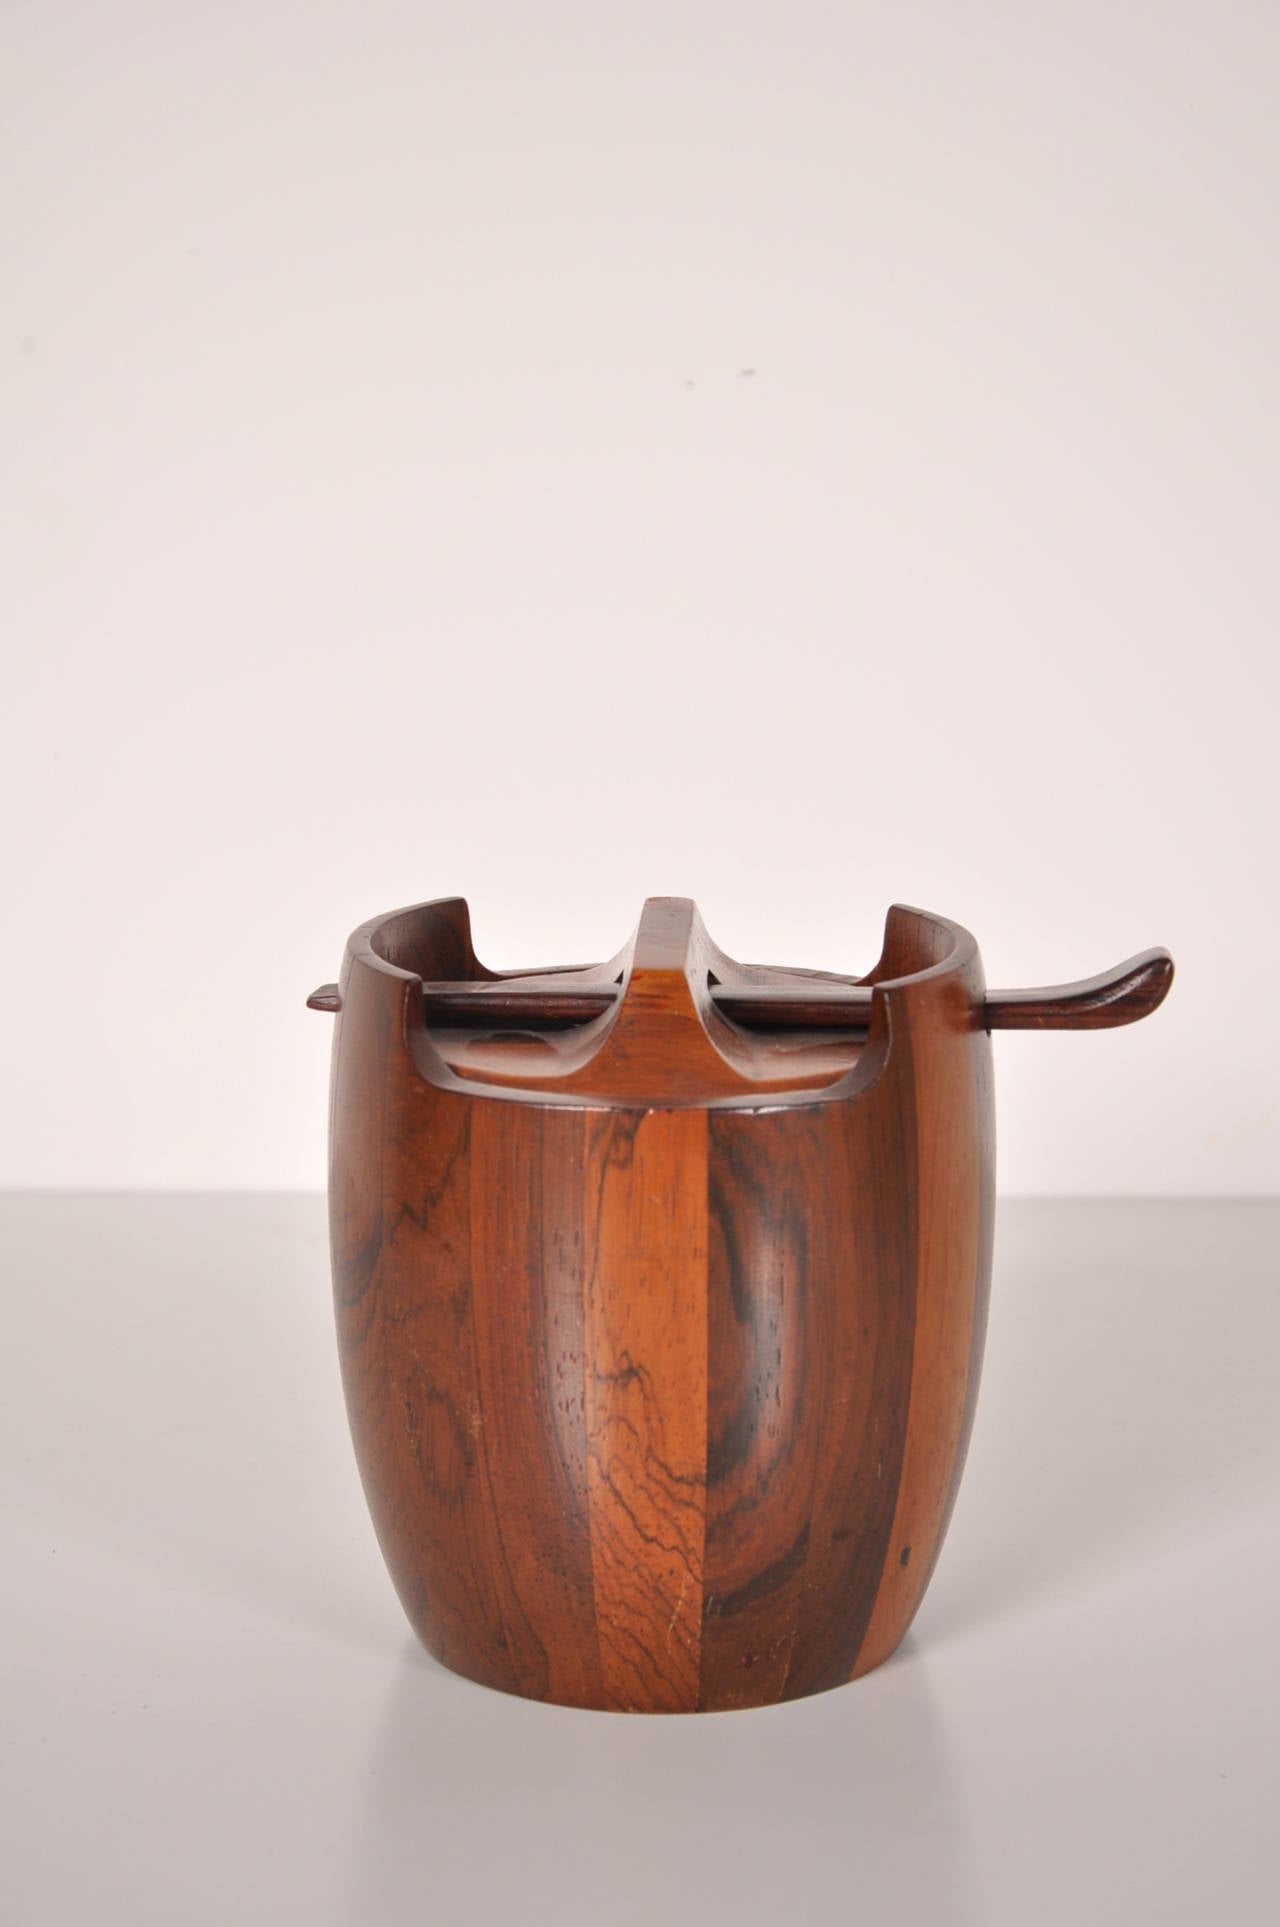 Beautiful tobacco pot by Jean Gillon, manufactured in Brazil around 1960.

Made of high quality Brazilian solid rosewood, this well-crafted pot is still in great condition and includes the original spoon that also closes the lid.

With minor